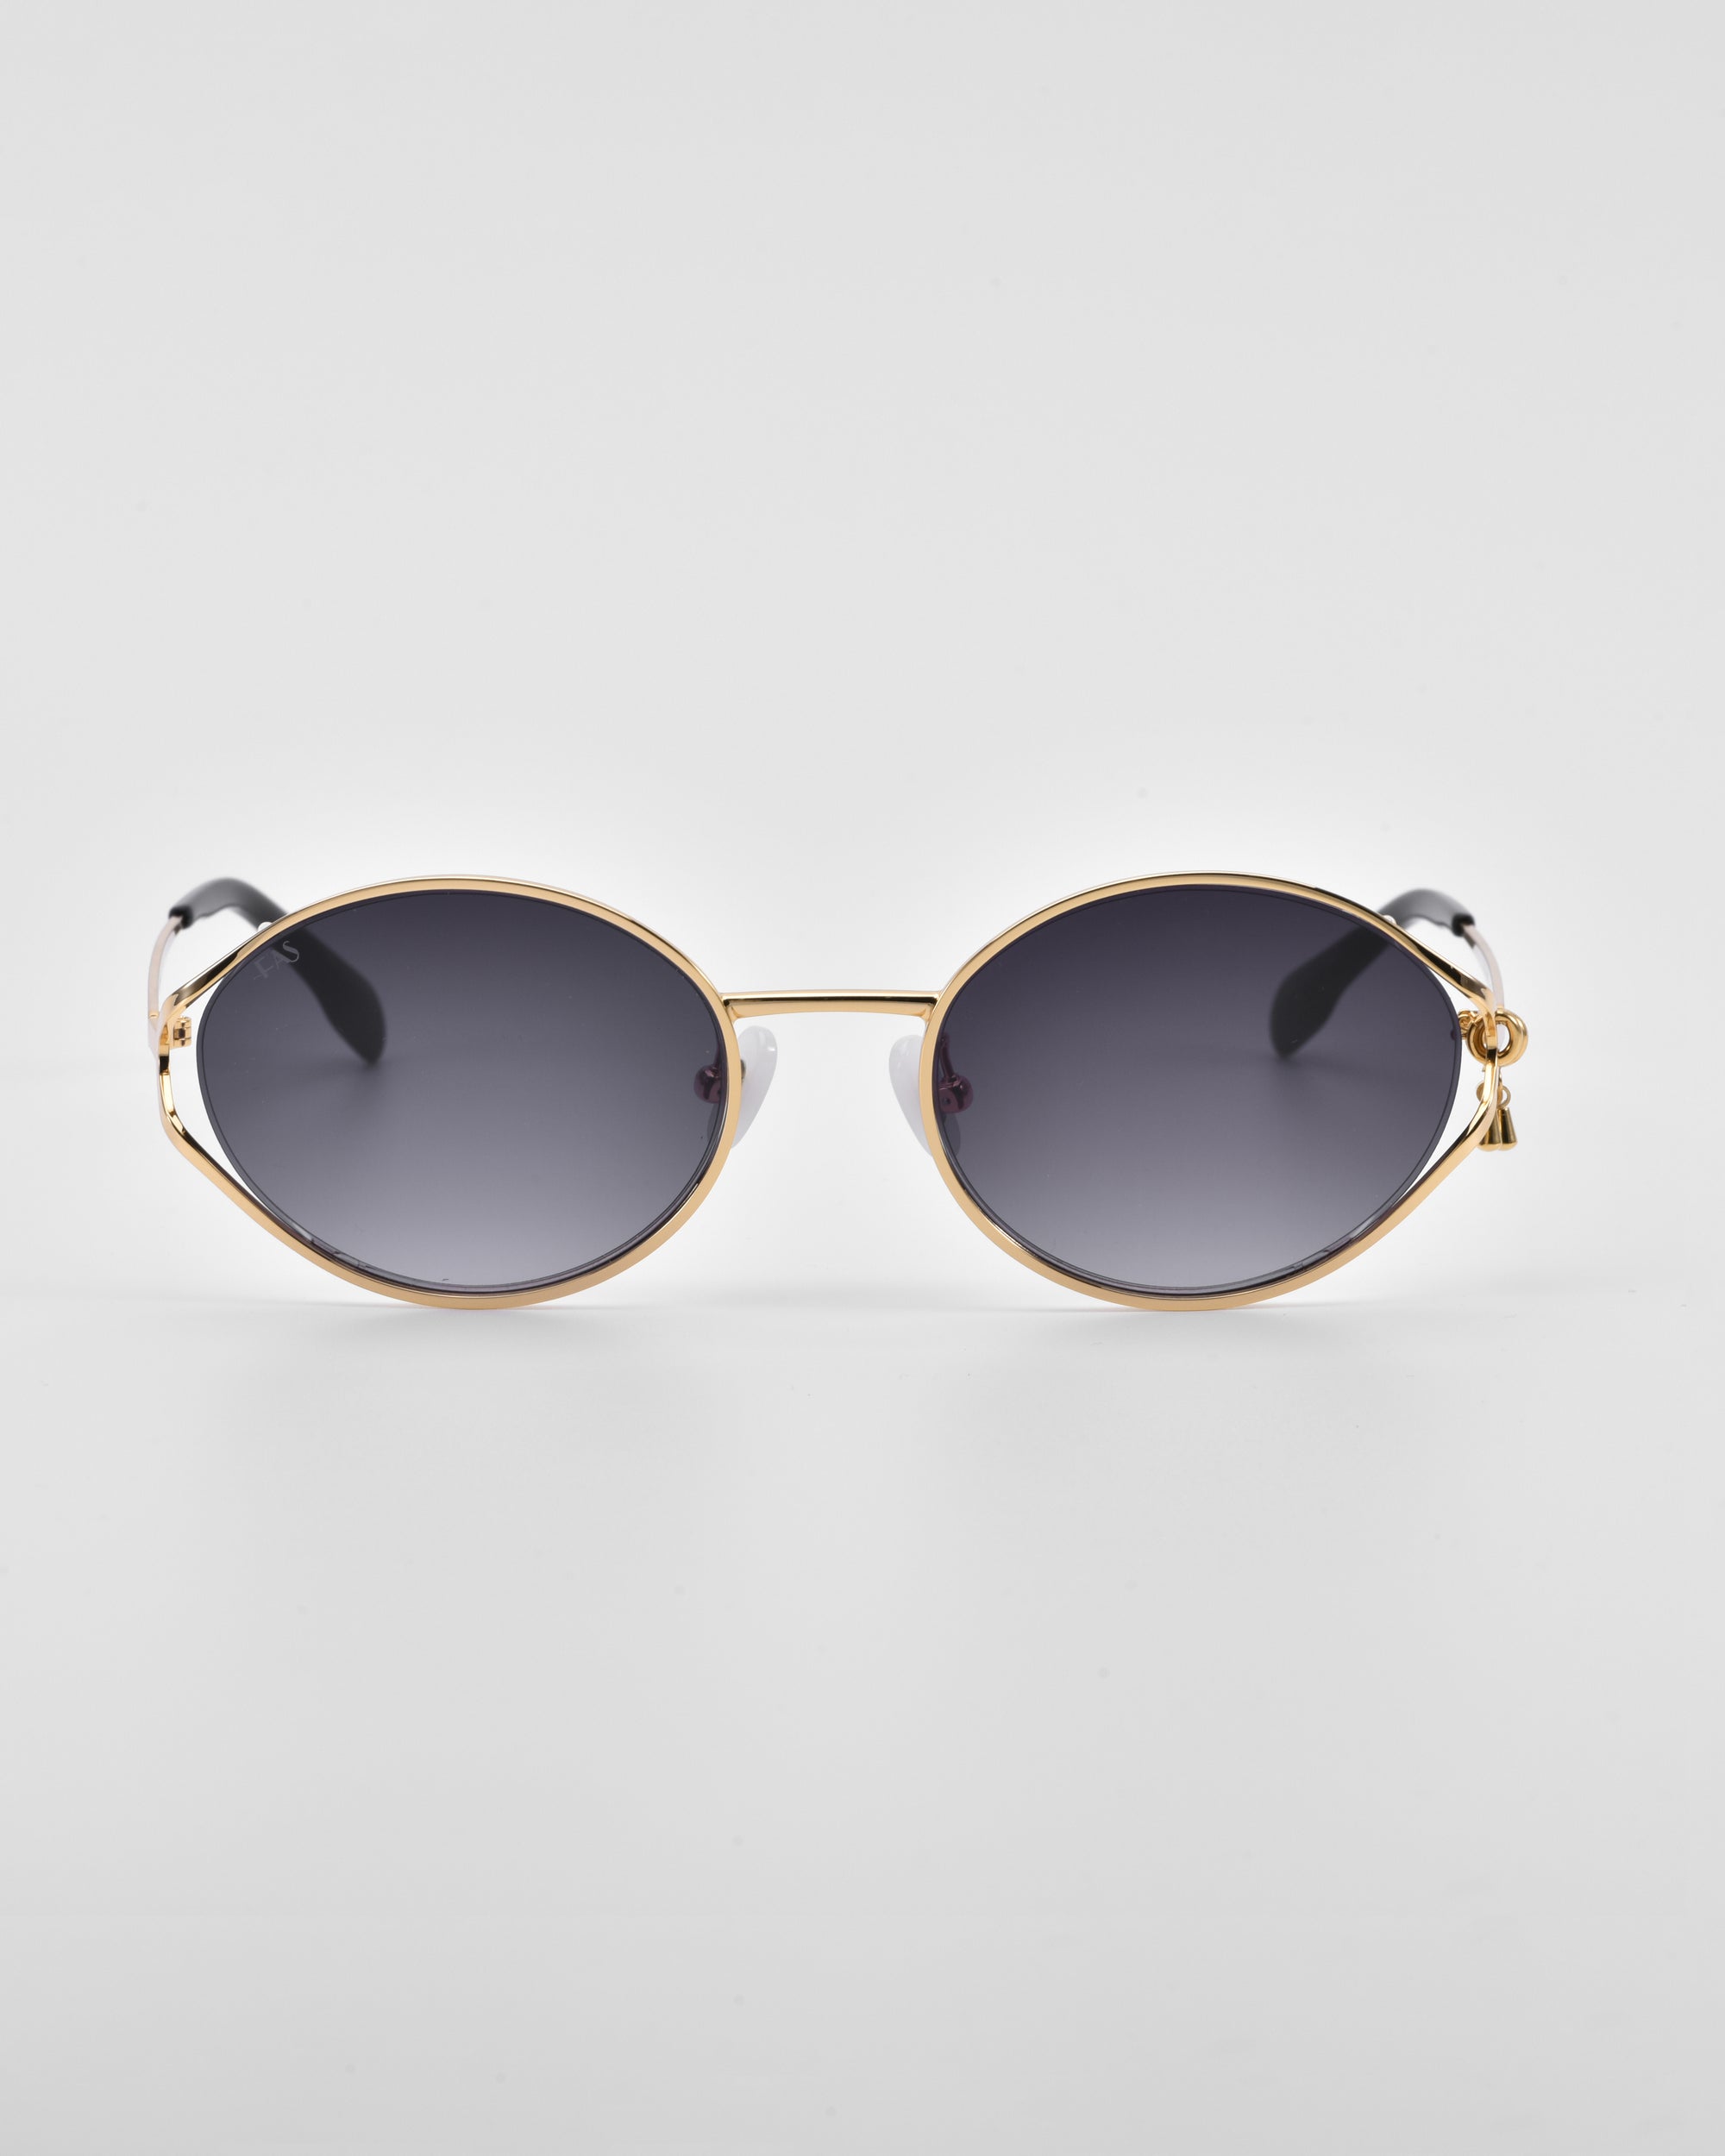 A pair of stylish Sky sunglasses by For Art&#39;s Sake® with round, dark-tinted lenses and a golden metal frame. Featuring 18-karat gold detailing and sleek, minimalist design accents, the glasses come with natural jade-stone nose pads, set against a plain white background.